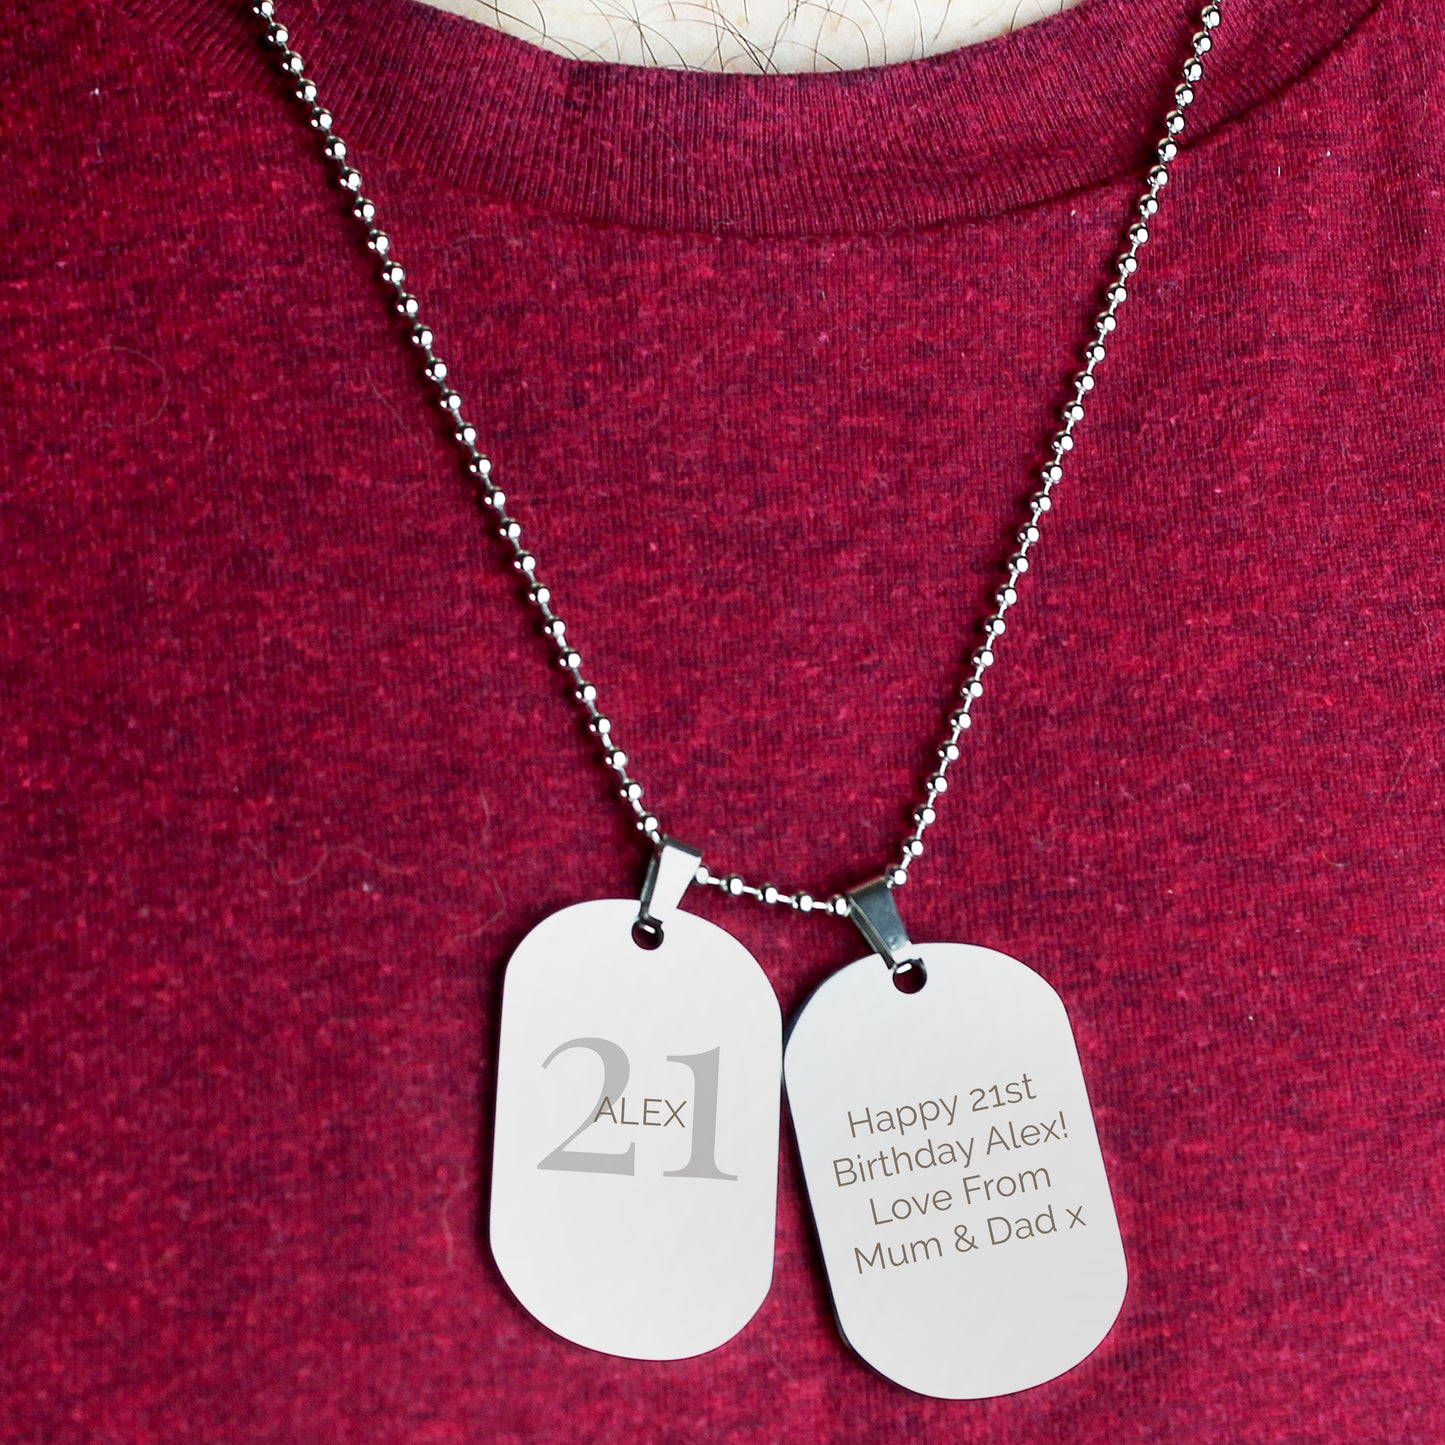 Personalised Big Age Stainless Steel Double Dog Tag Necklace - Personalise It!